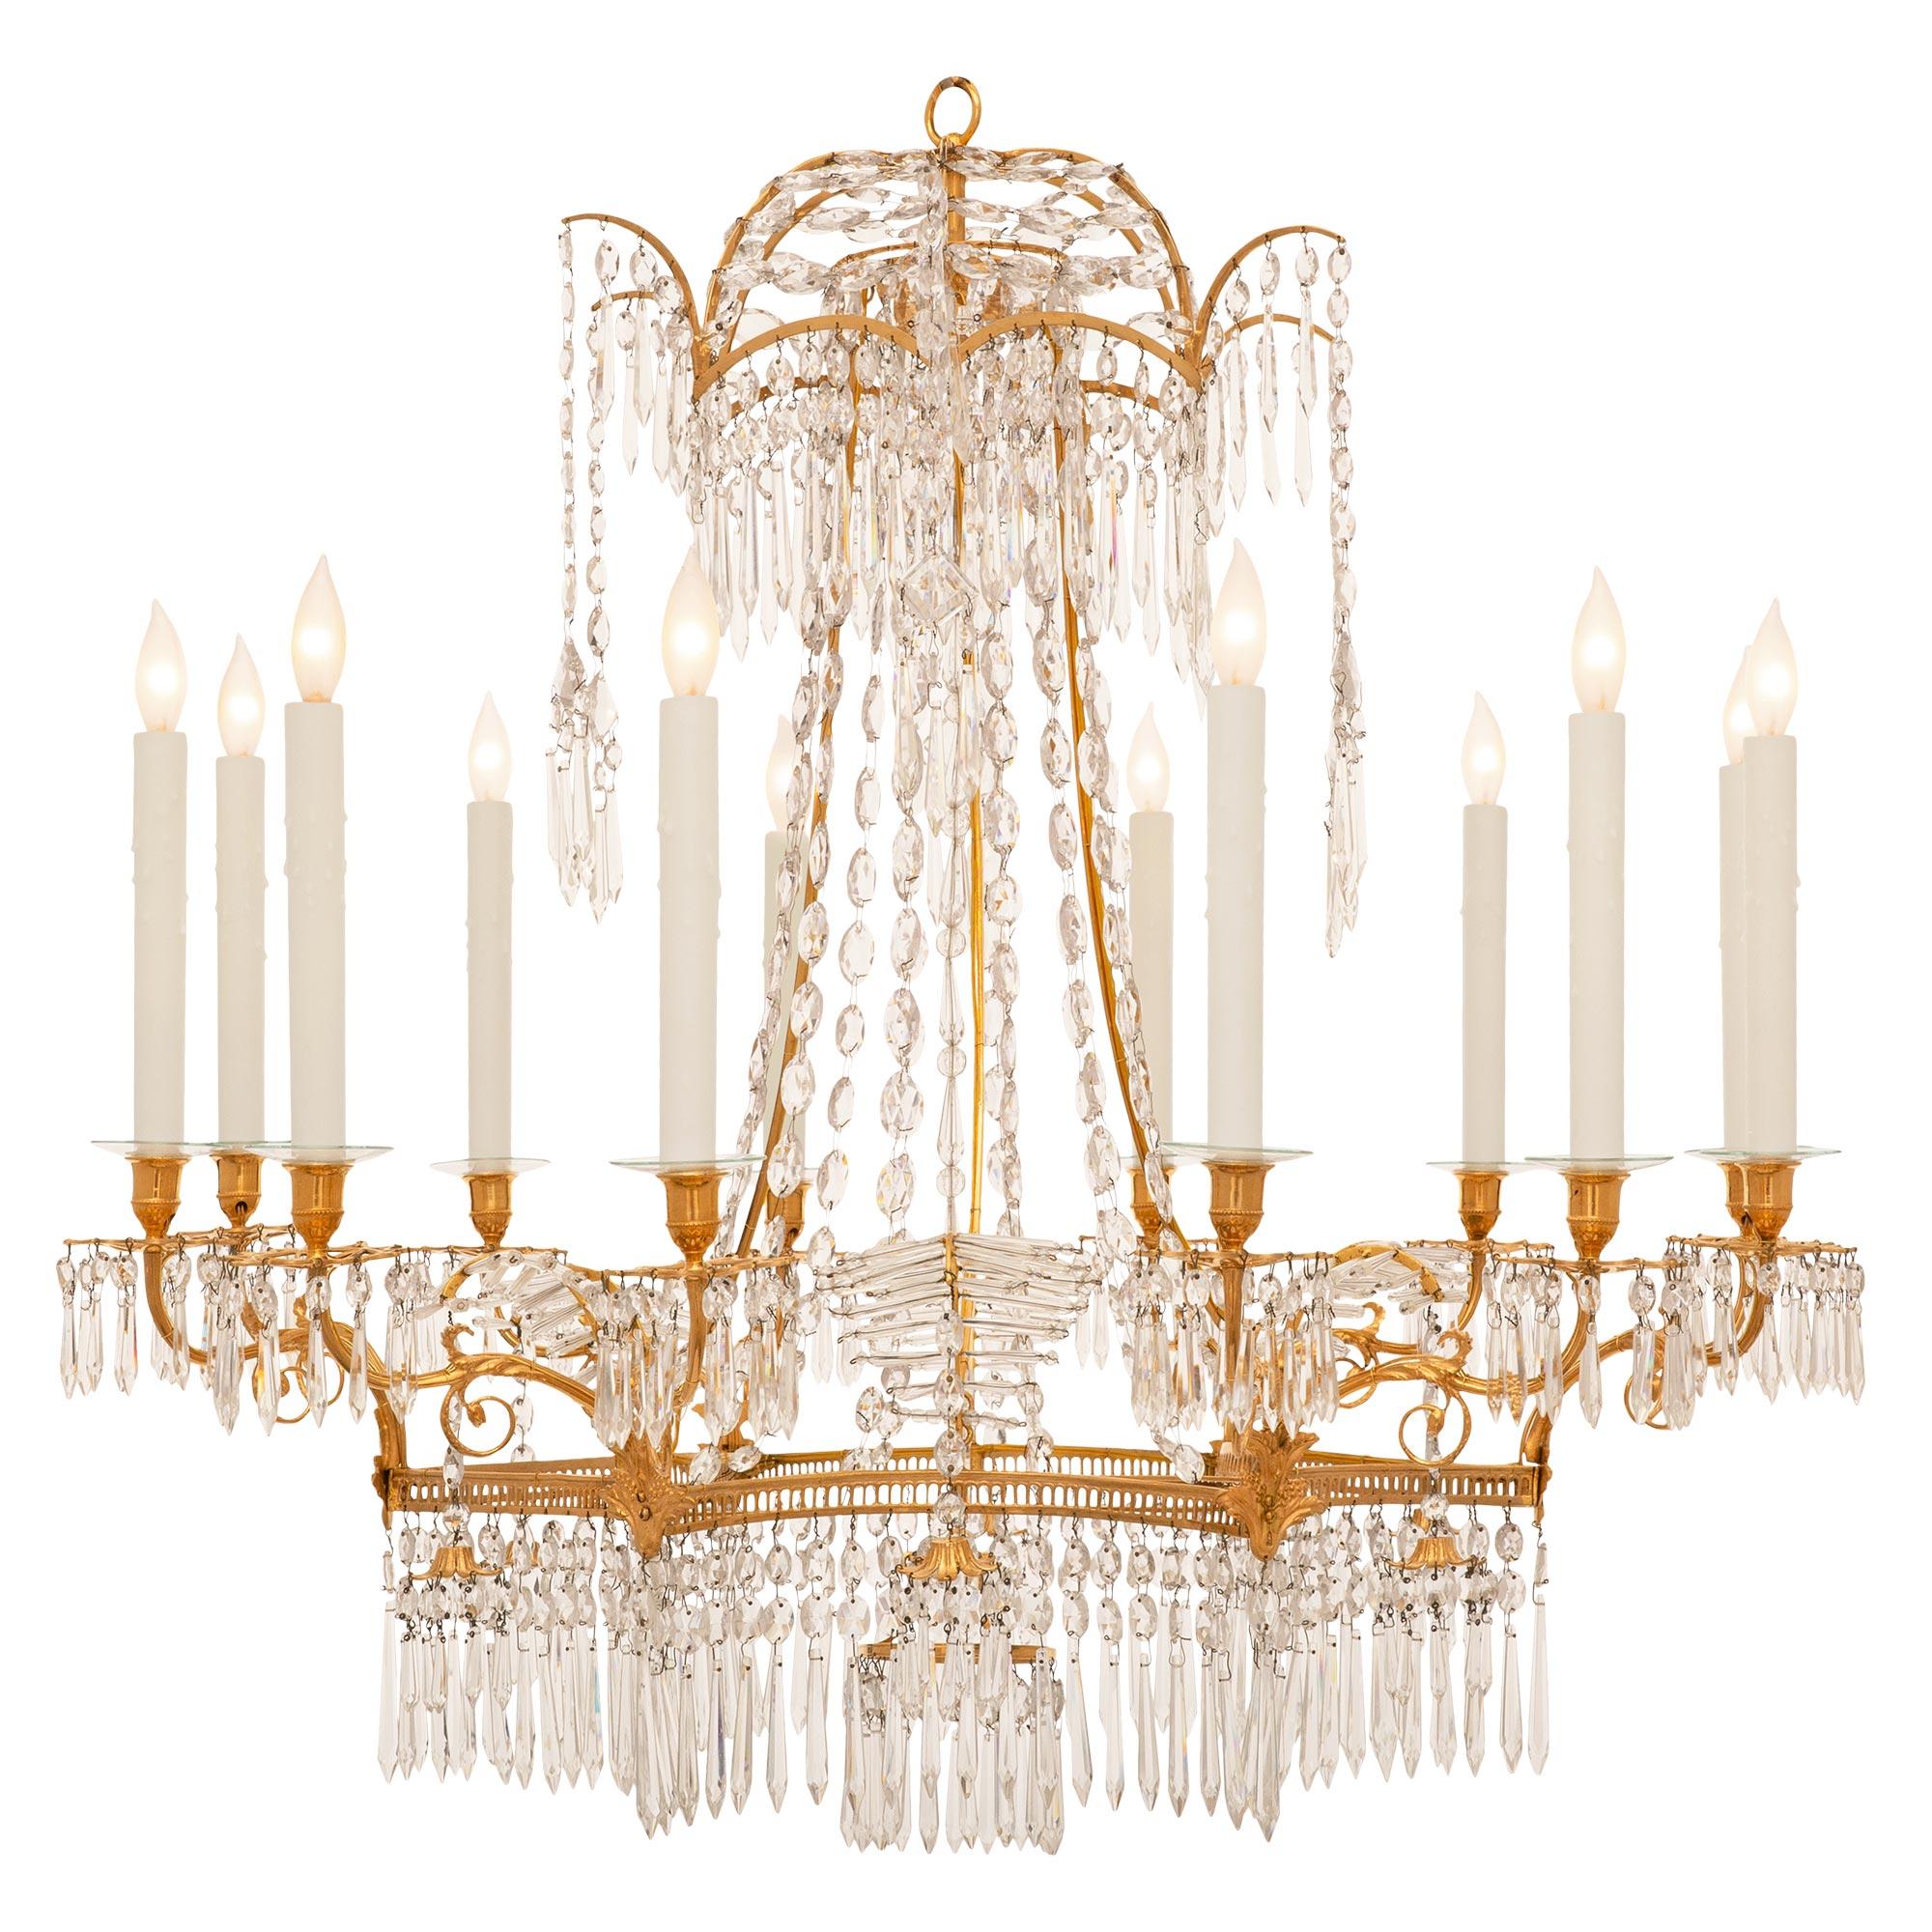 Baltic 19th century Ormolu and cut glass chandelier For Sale 3